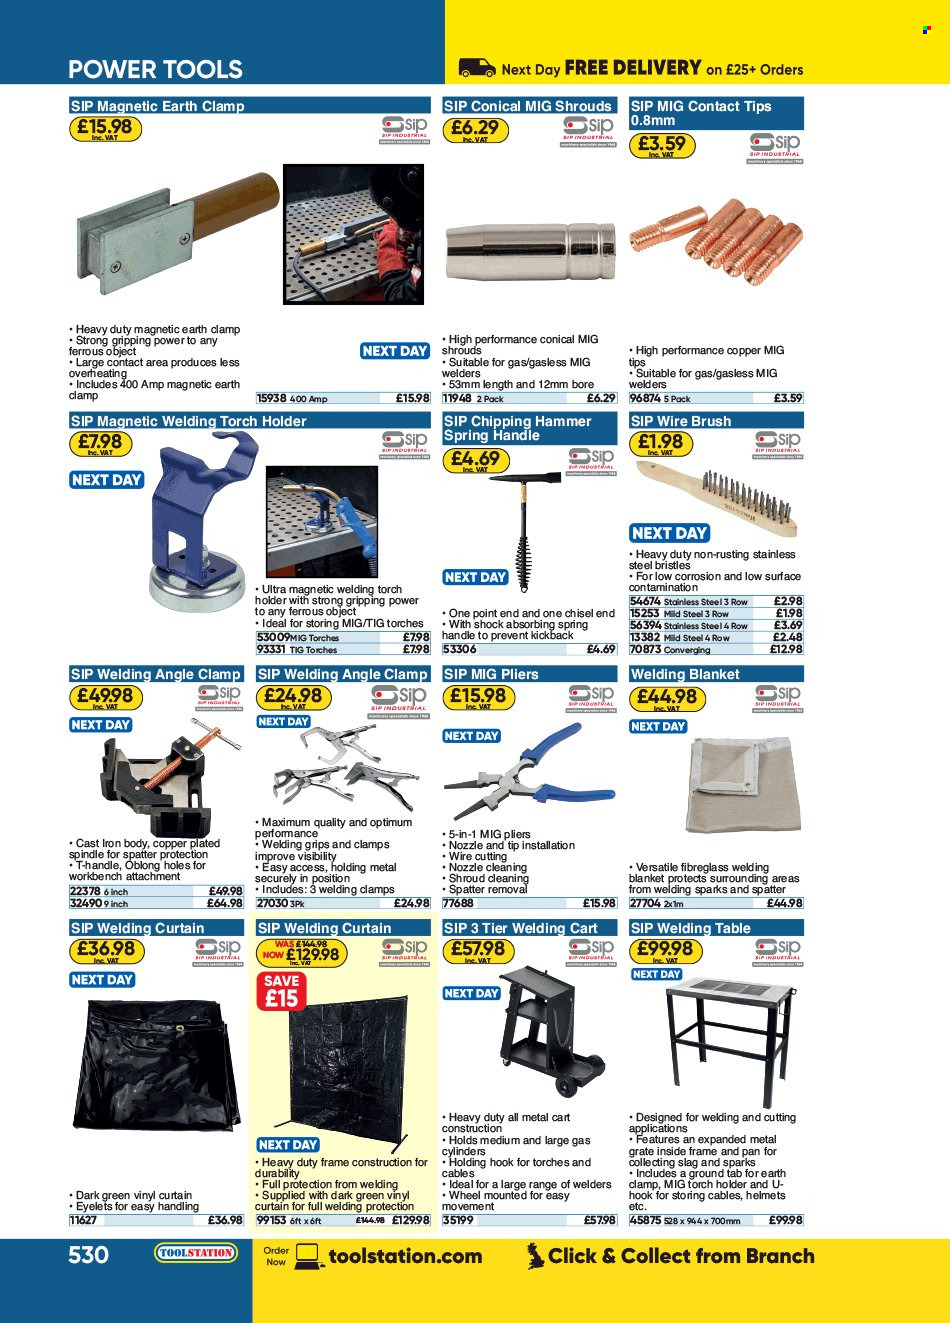 thumbnail - Toolstation offer  - Sales products - hammer, pliers, wire brush, blanket, cart, table, work bench, torch holder. Page 530.